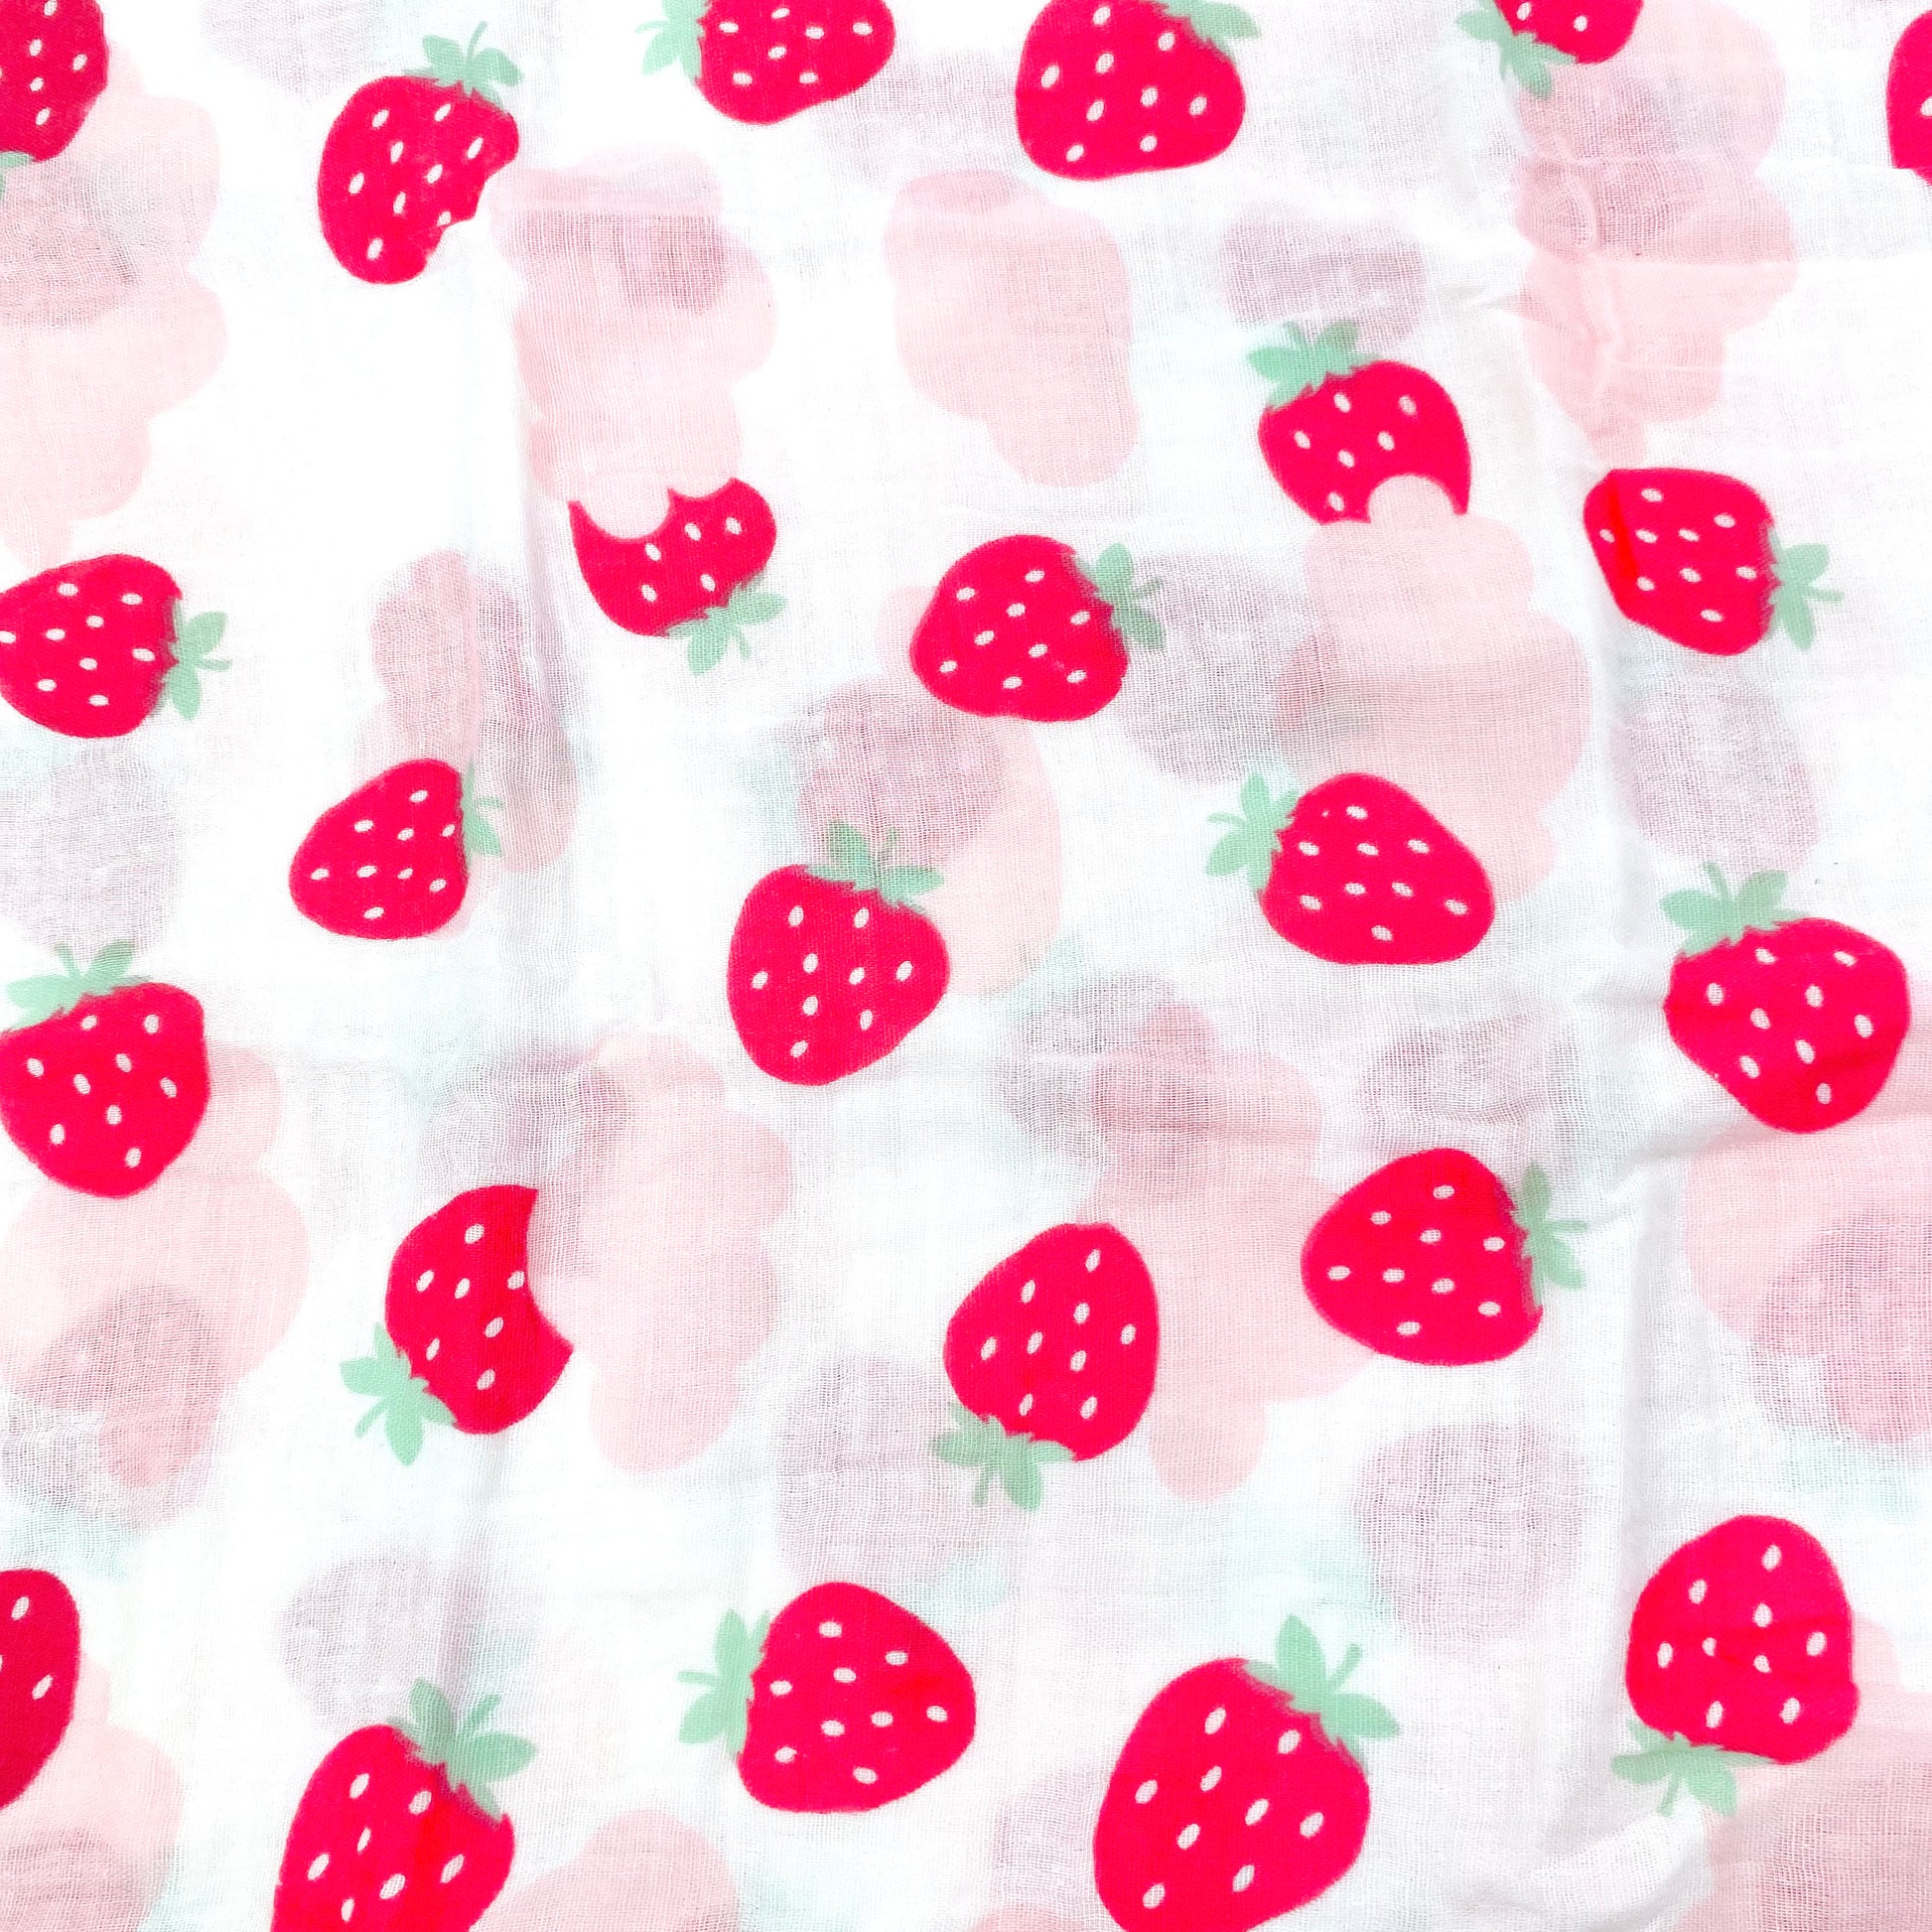 Close up pattern of a muslin swaddle blanket with a pink strawberry design.